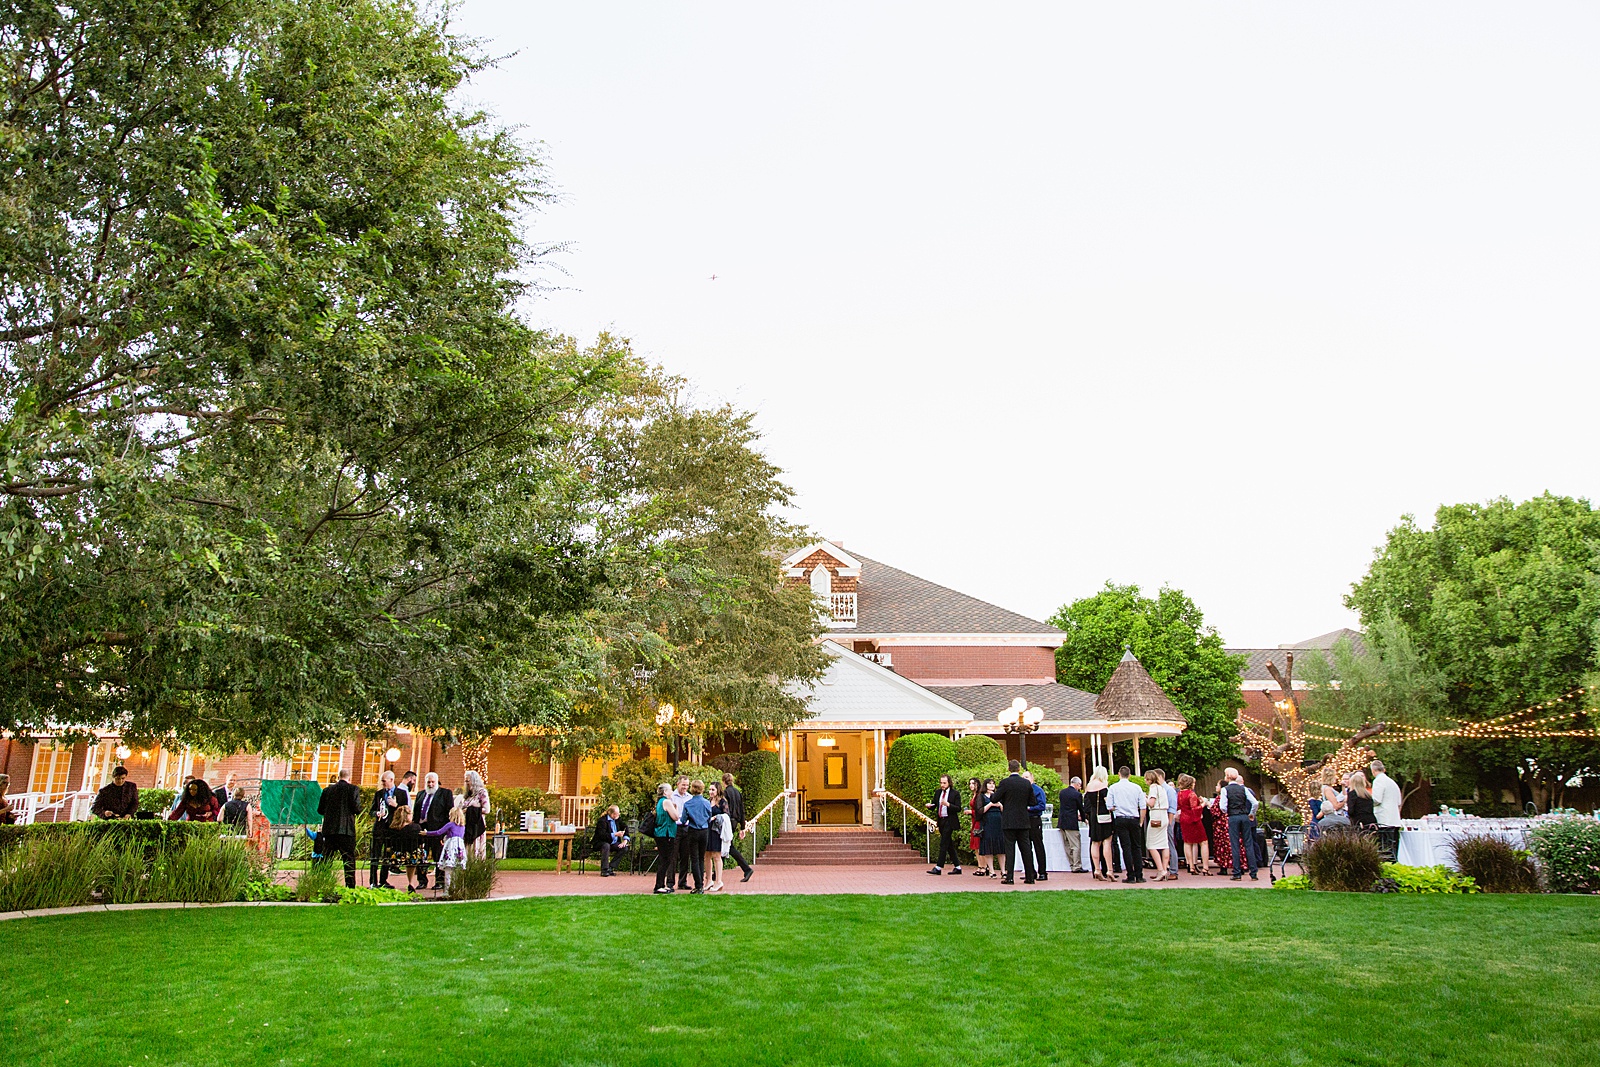 Guests enjoying cocktail hour on the patio of the outdoor wedding venue Stonebridge Manor by Mesa wedding photographer PMA Photography.